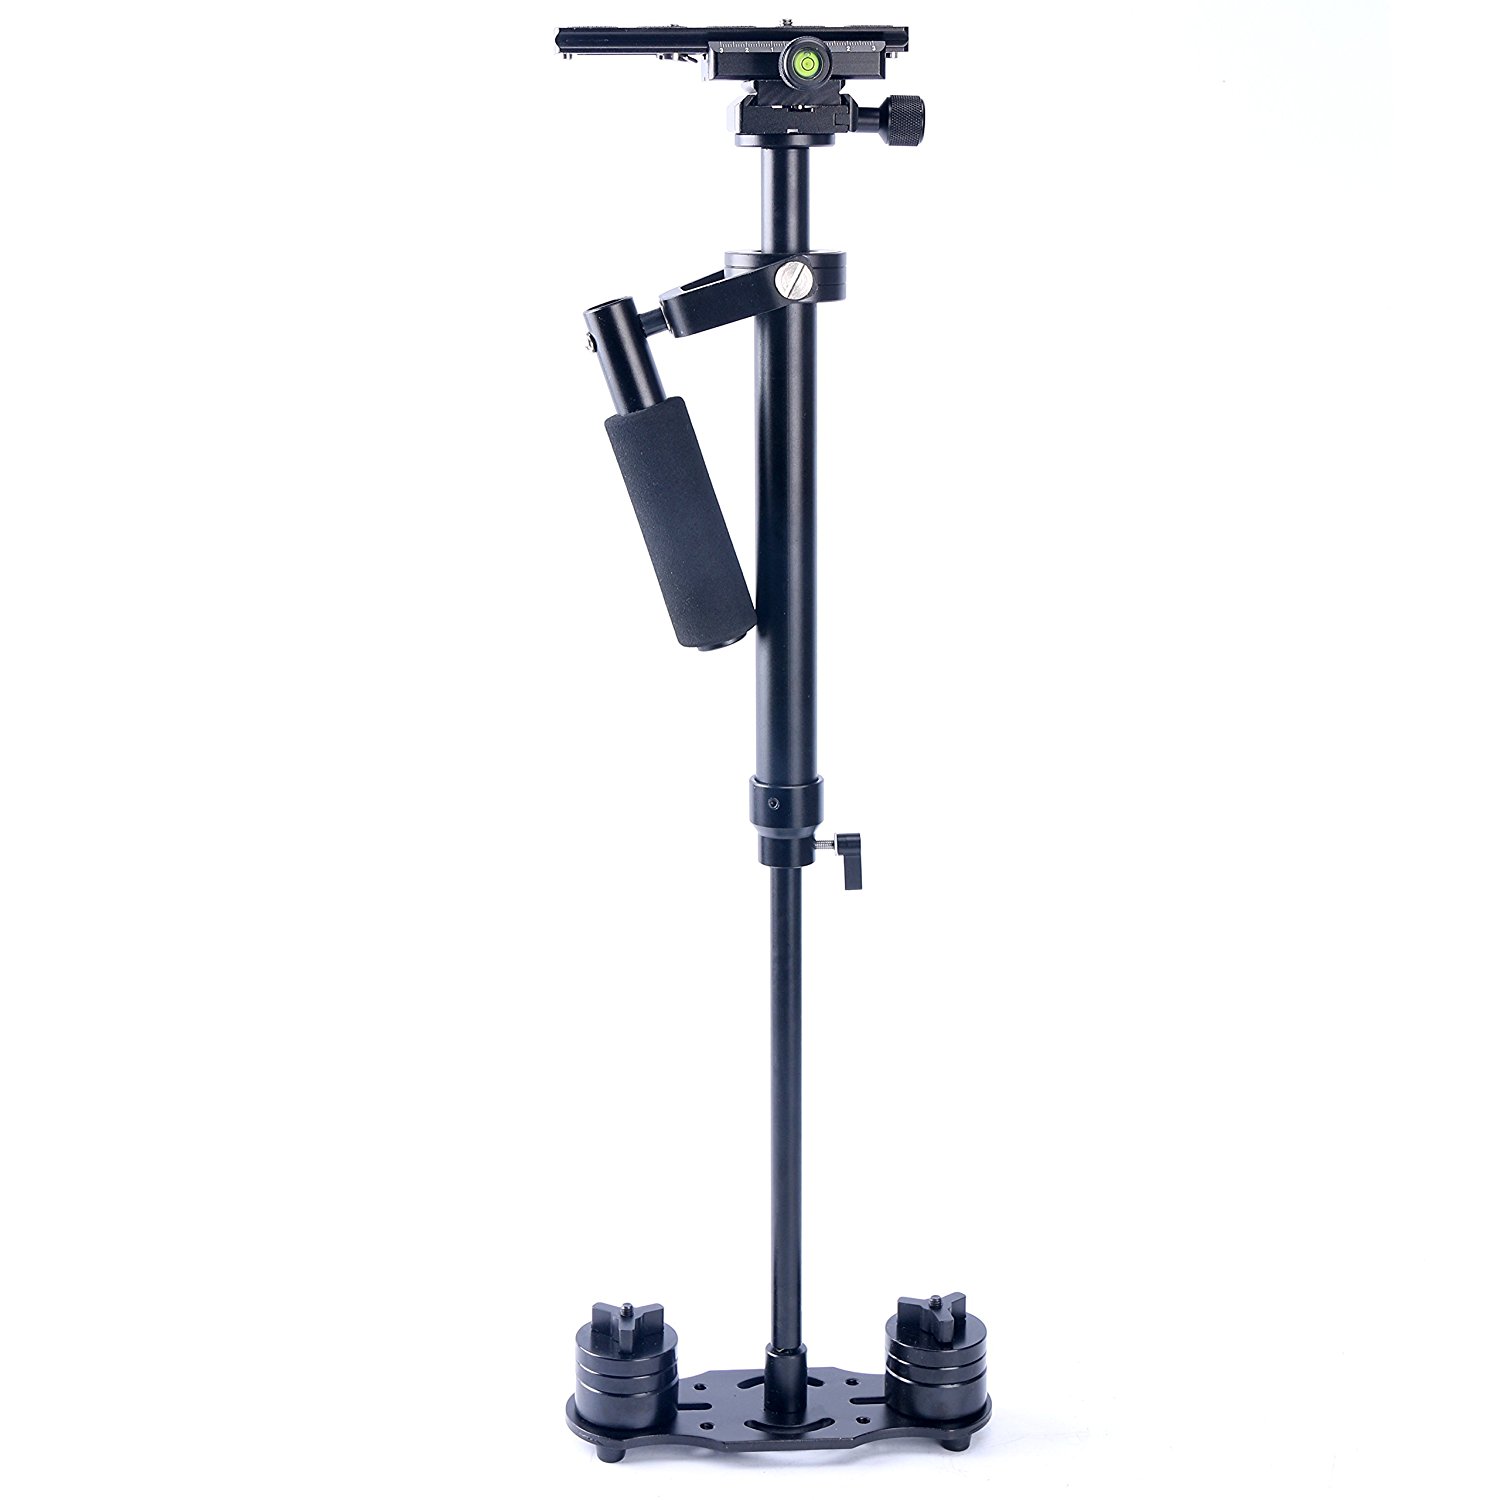 S60 Handheld Steadicam/Camera Stabilizer 24"/60cm with Quick Release Plate DSLR - ywyAyEBBwAyzFvyGwFBzDyBHHHCHAyDHBxRXOD - S60 Handheld Steadicam/Camera Stabilizer 24&#8243;/60cm with Quick Release Plate DSLR